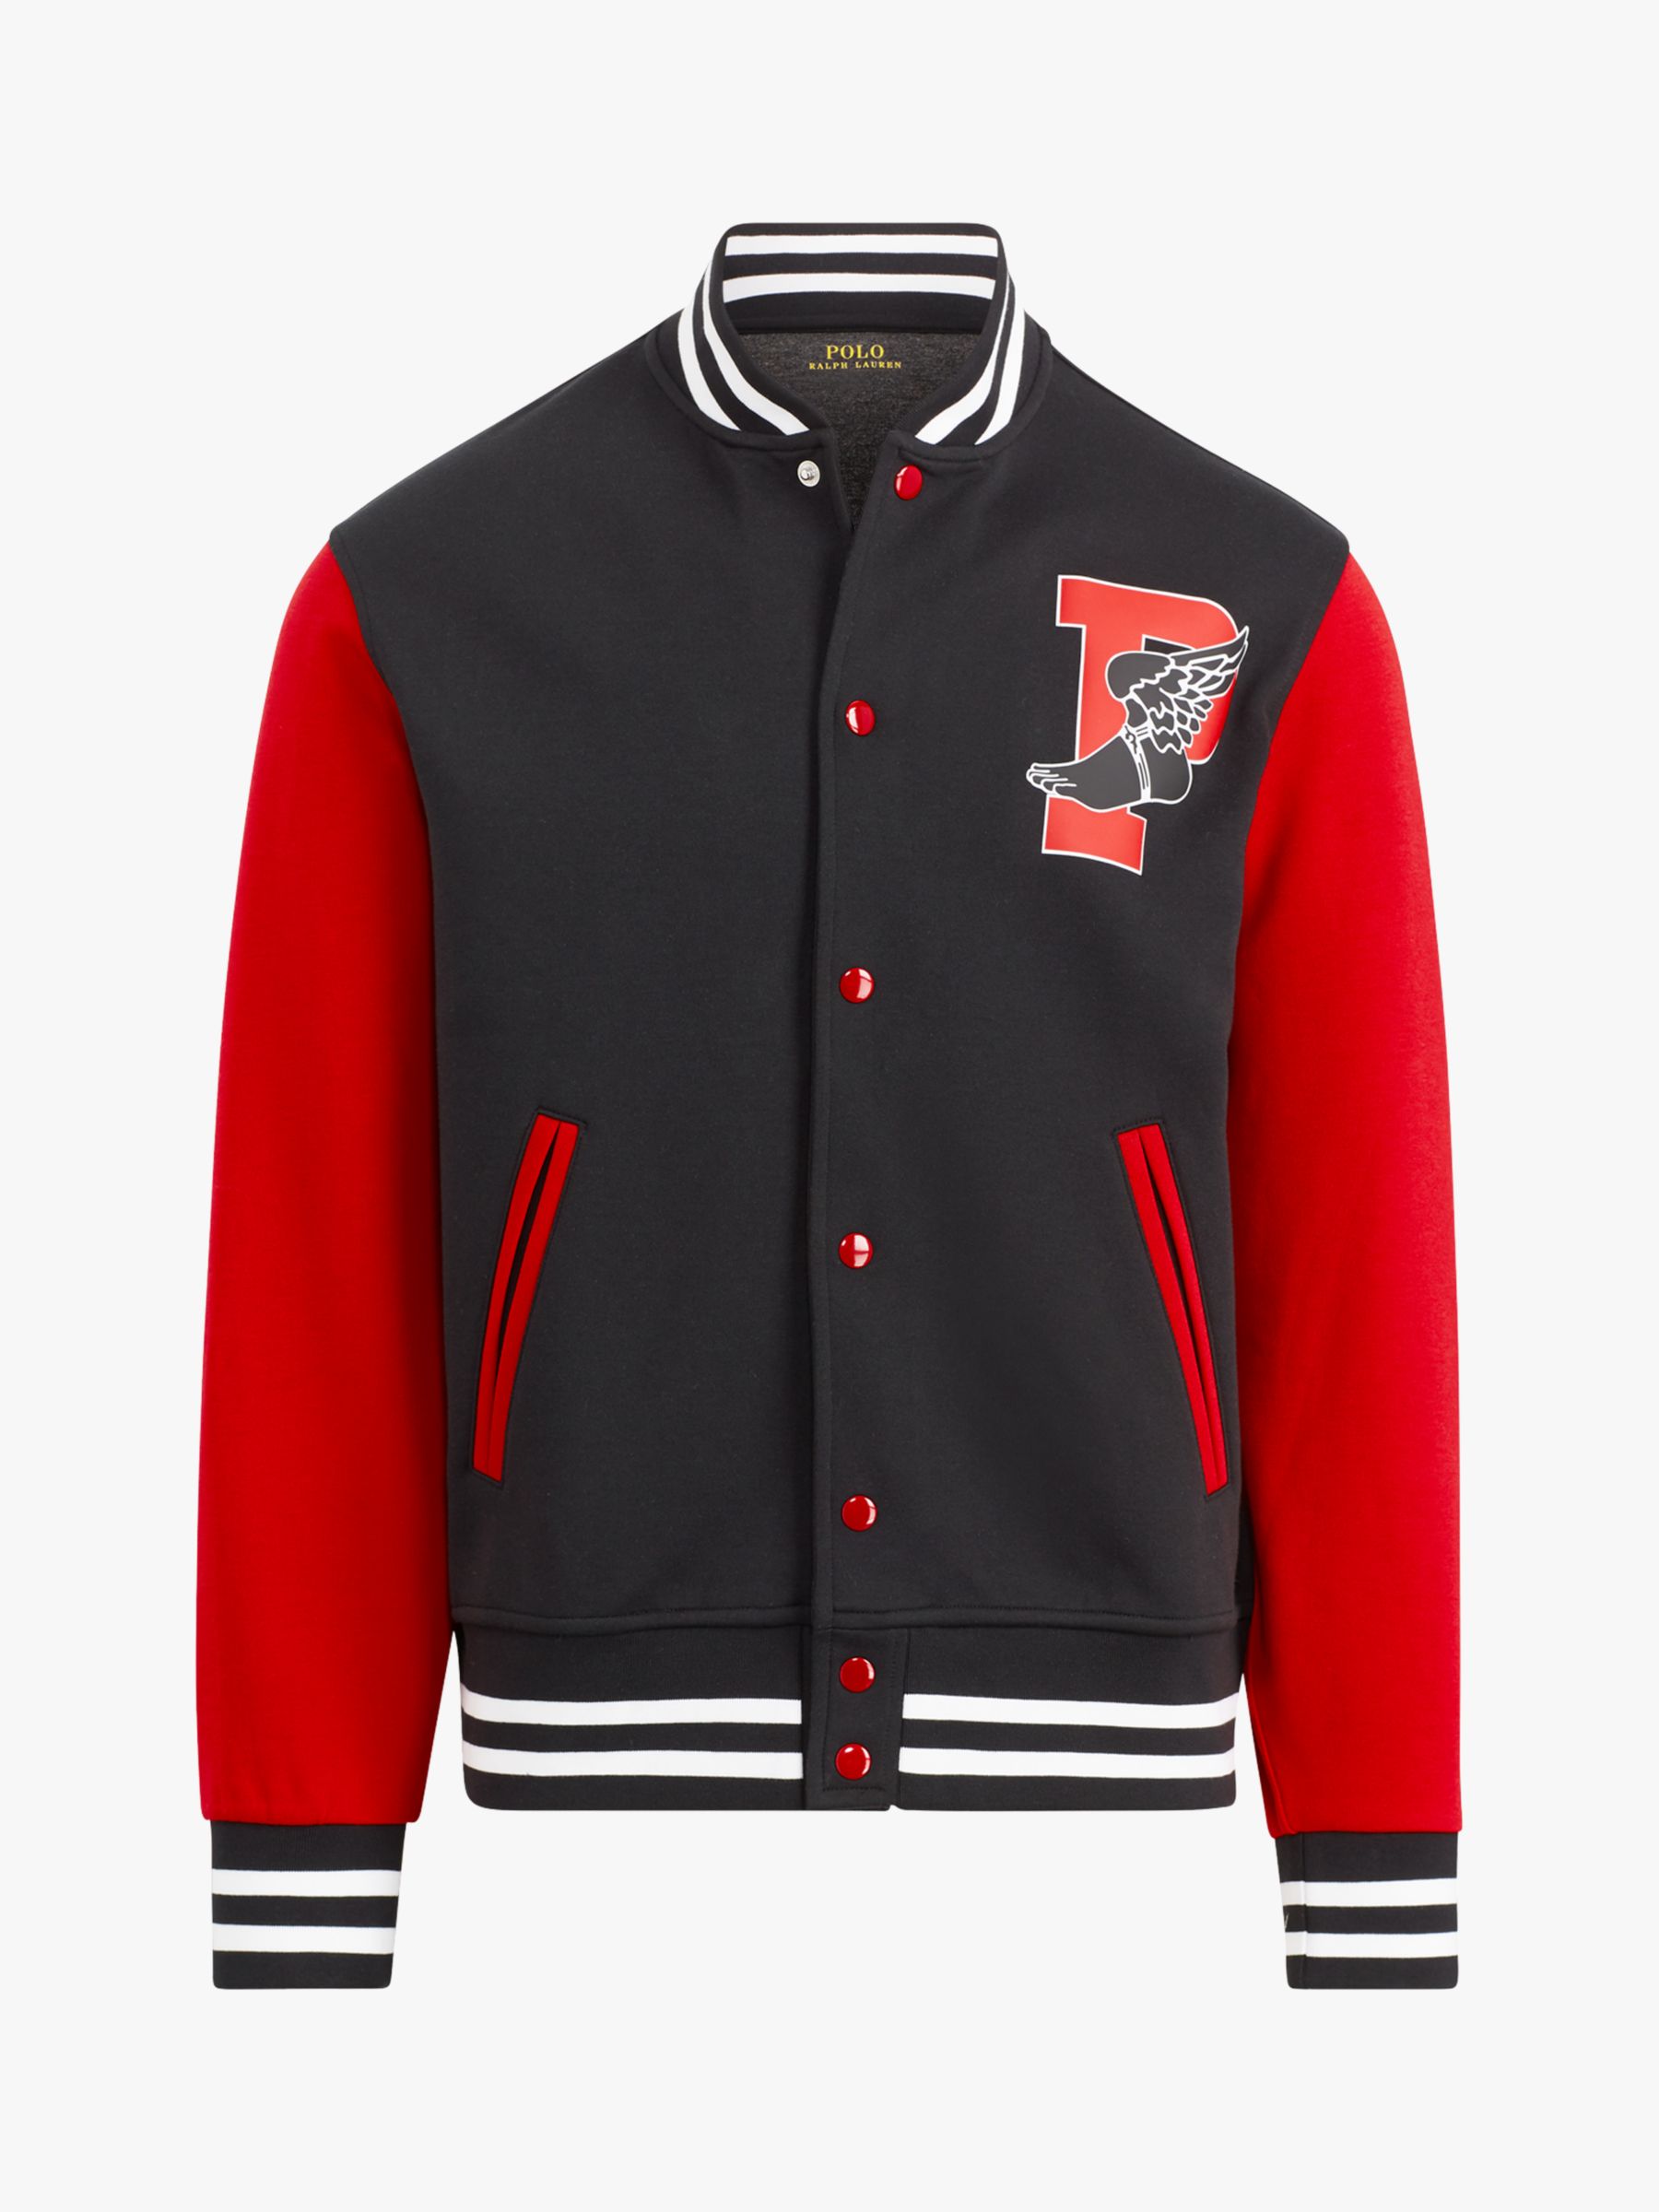 red and black polo jacket